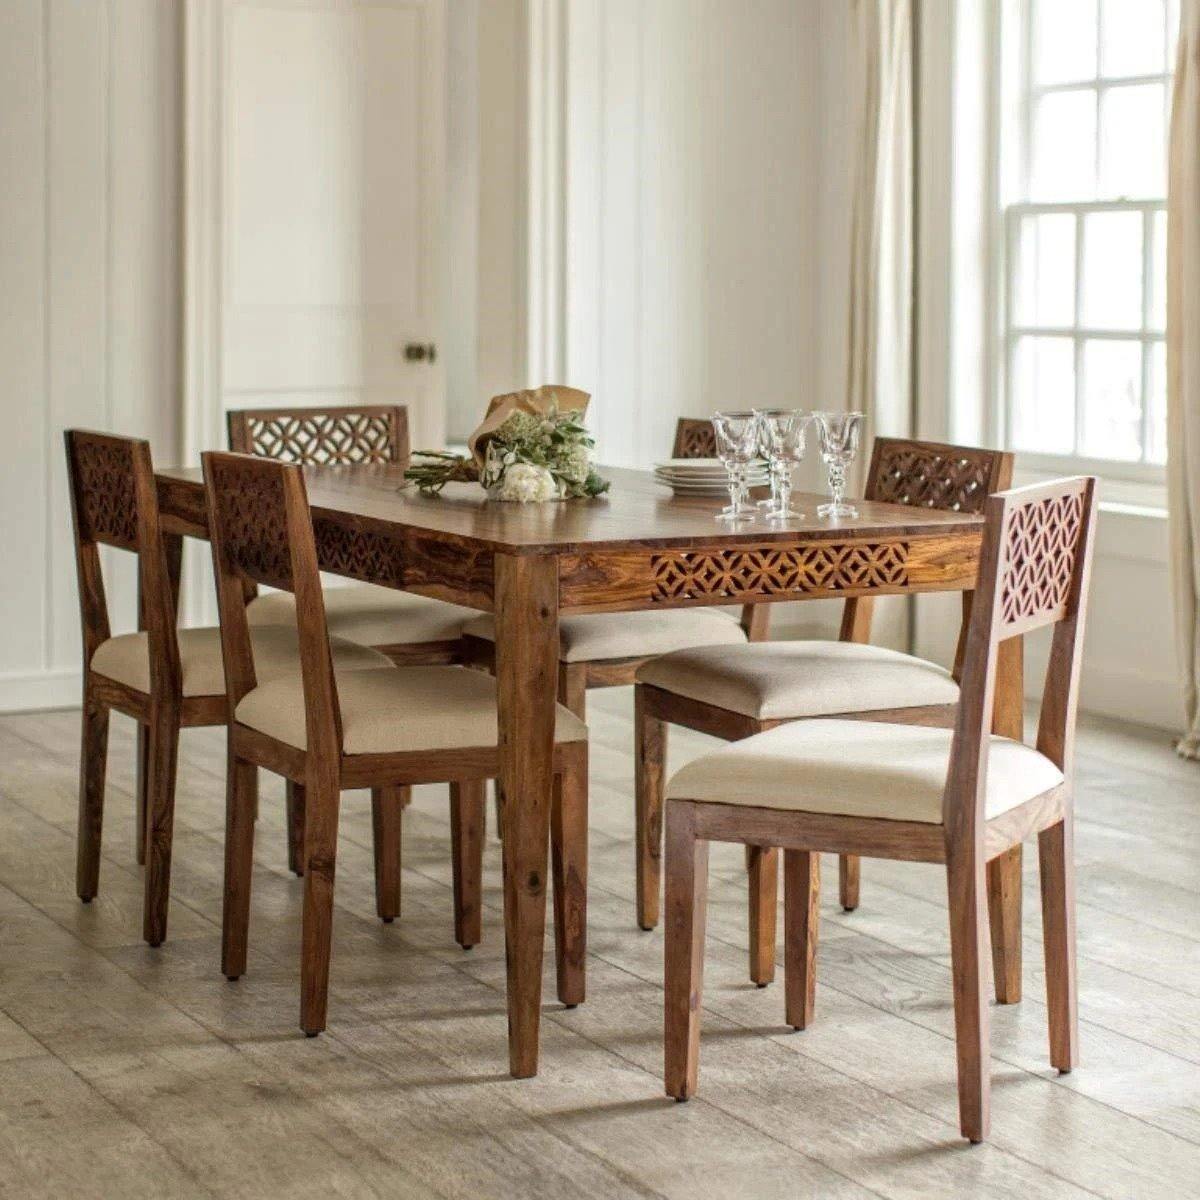 Dining Table Sets - WoodenTwist